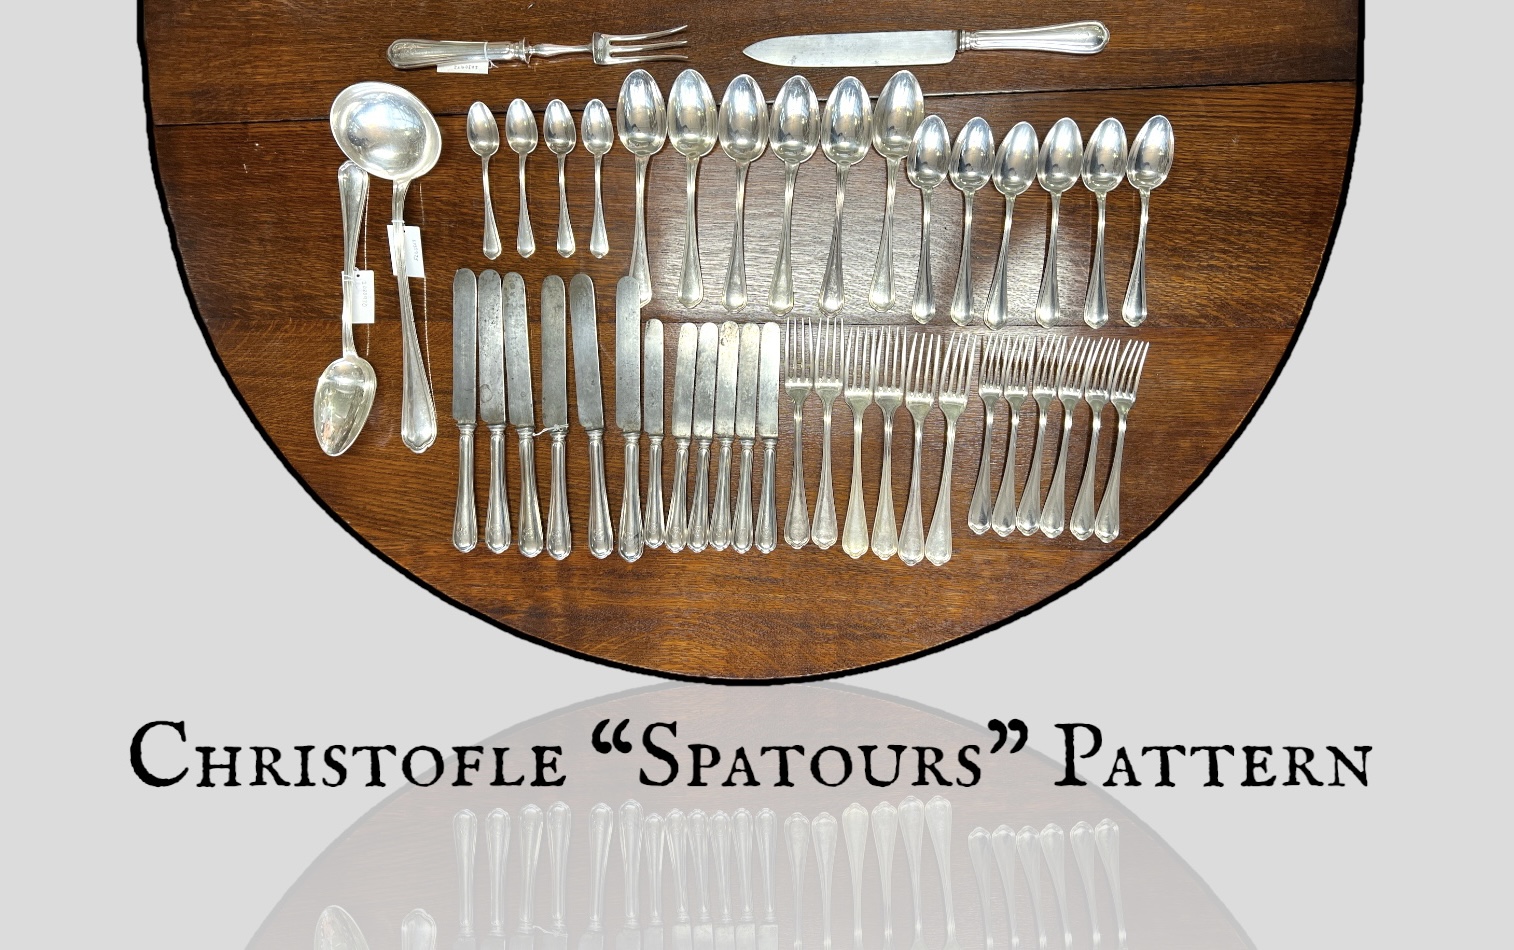 Christofle Spatours Pattern Cutlery at Moorabool Antiques, Geelong 